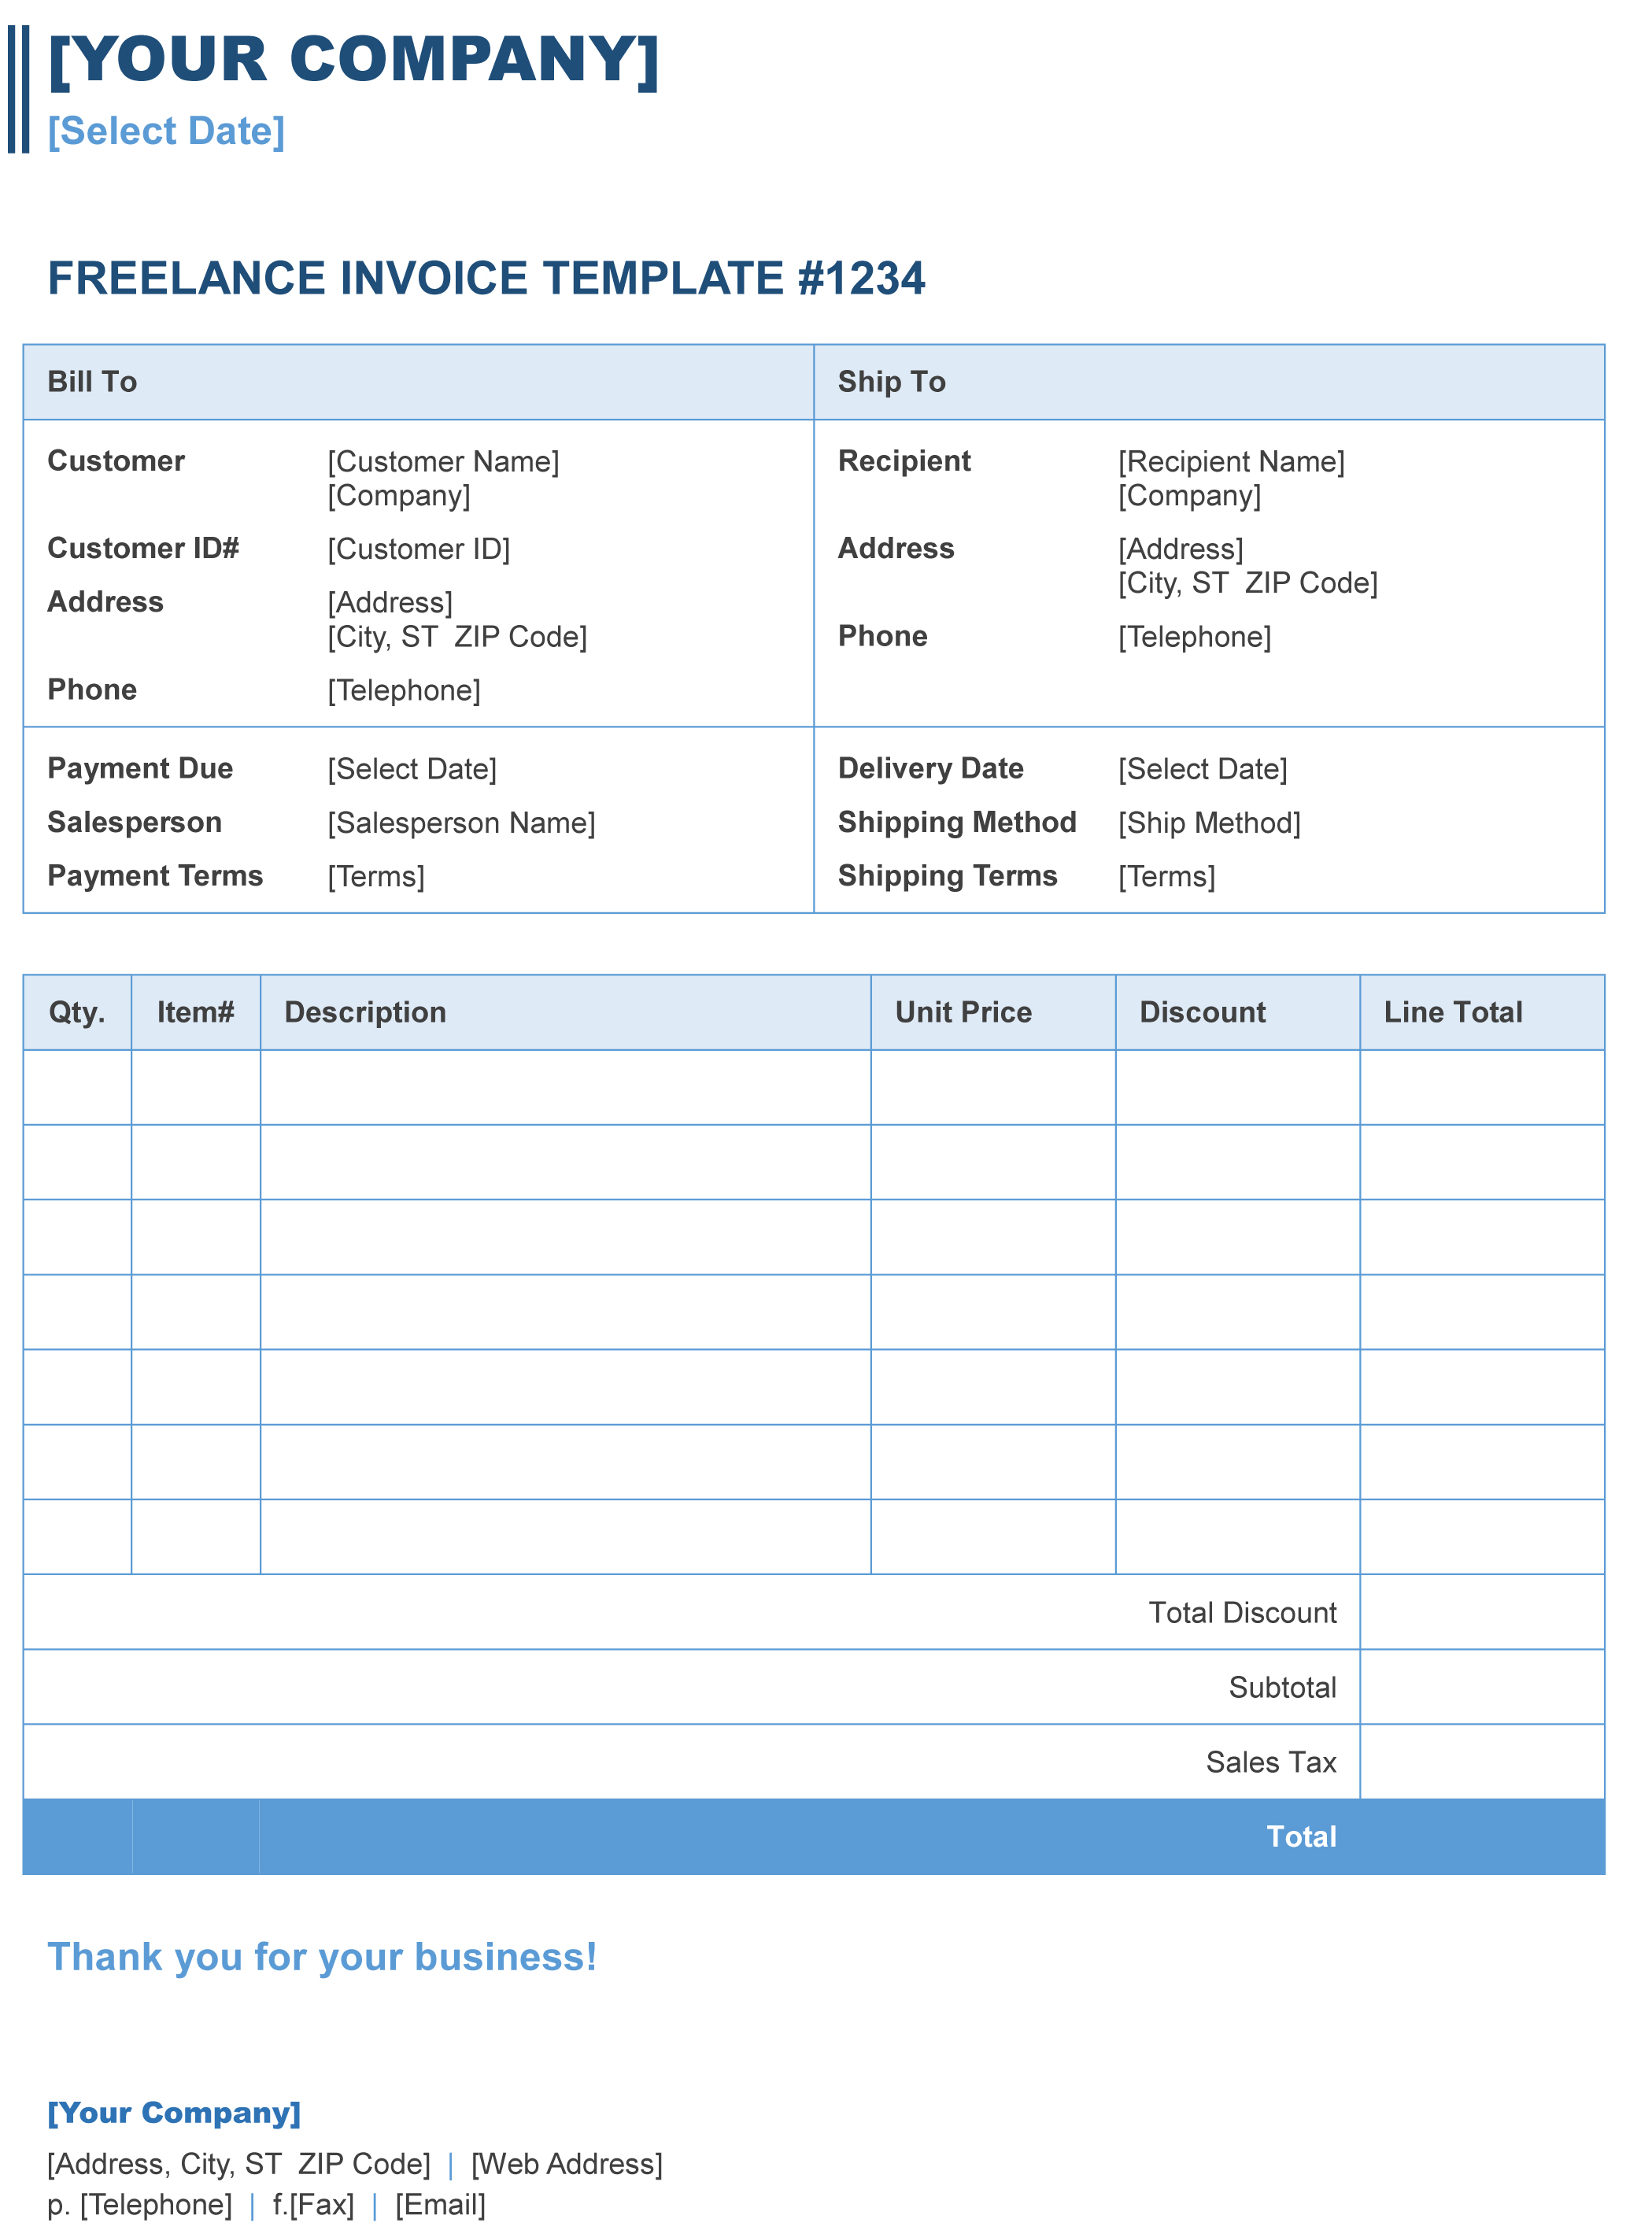 Hourly Service Invoice Template | Free Invoice Templates